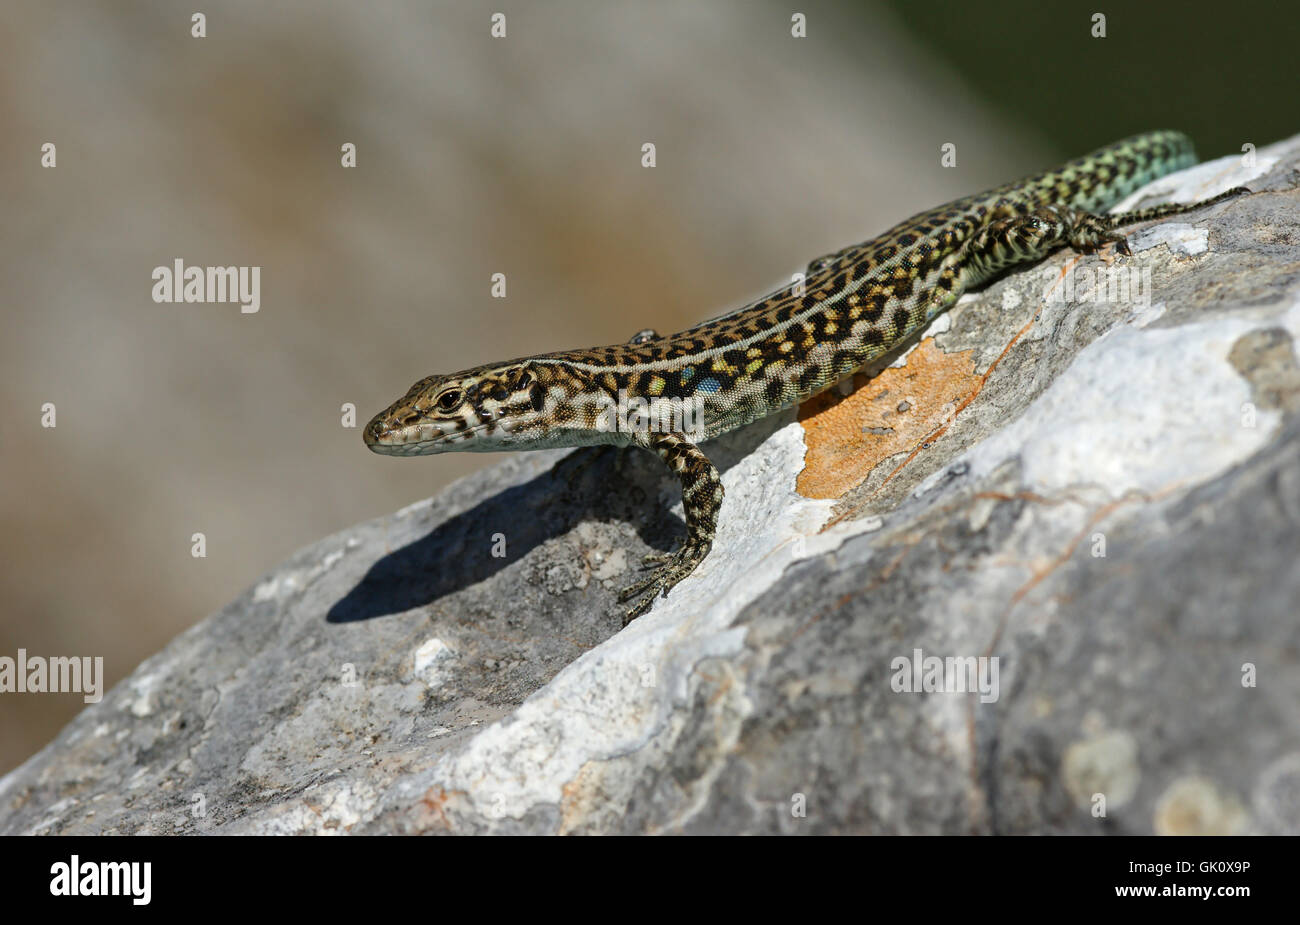 lizard saurian spotted Stock Photo